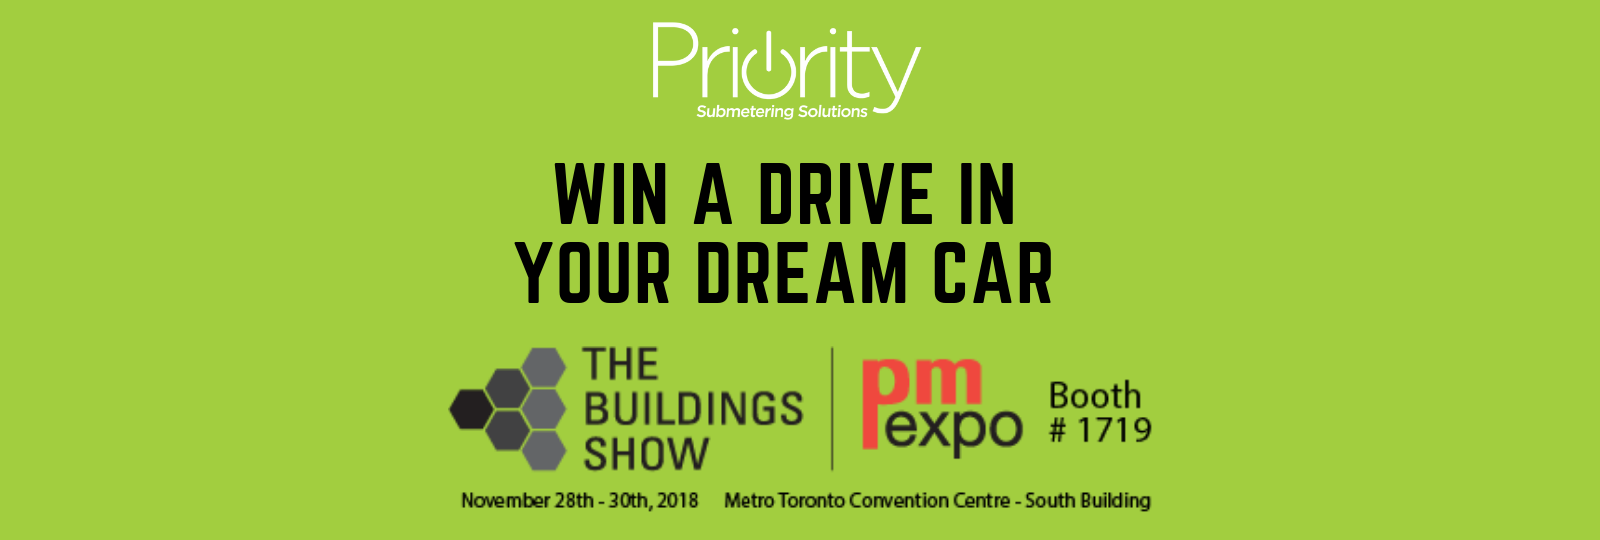 win a drive in your dream car blog post banner